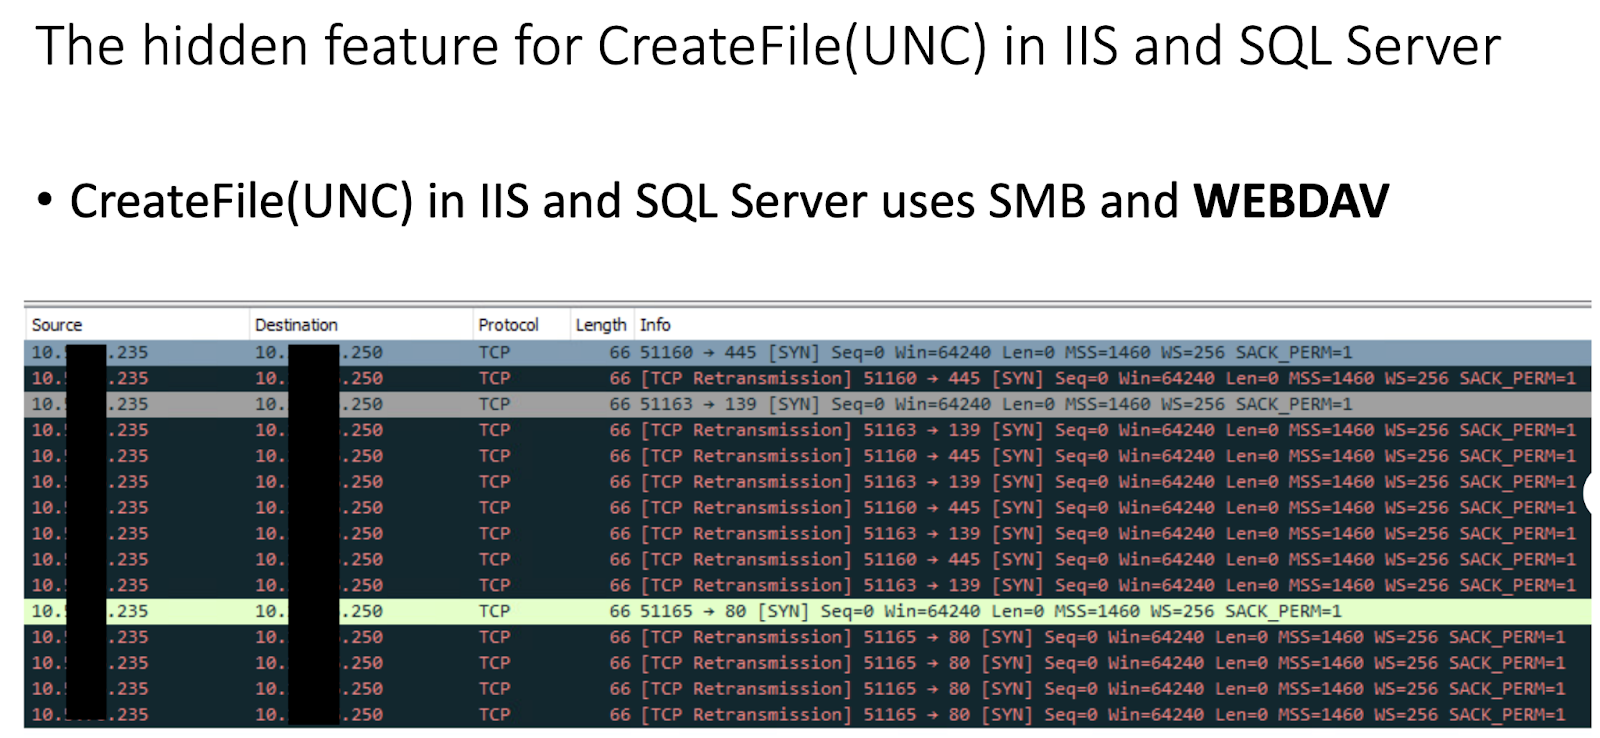 Screenshot of the hidden feature for CreateFile(UNC) in IIS and SQL Server using SMB and WEBDAV.